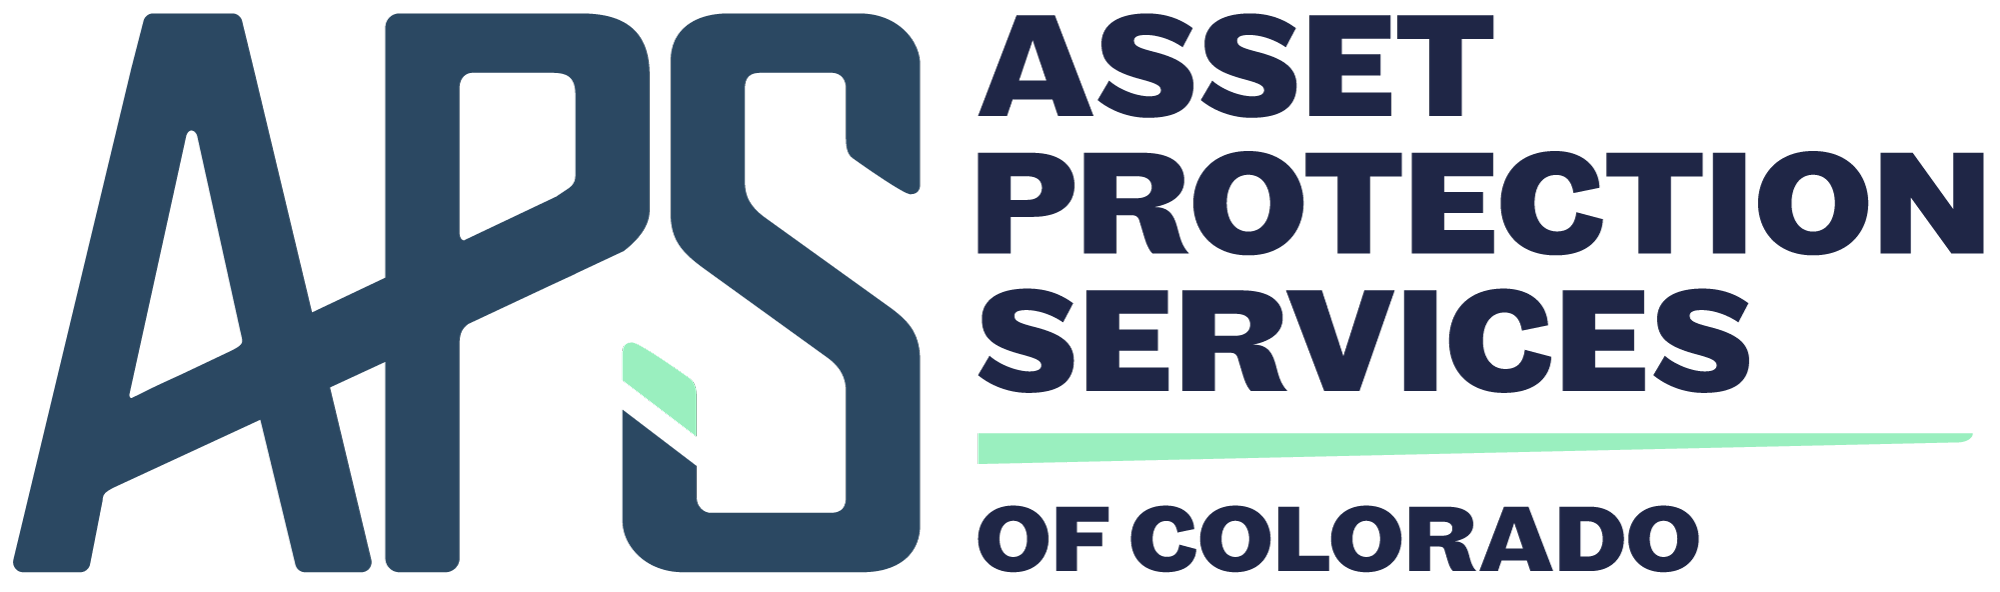 Asset Protection Services of Colorado